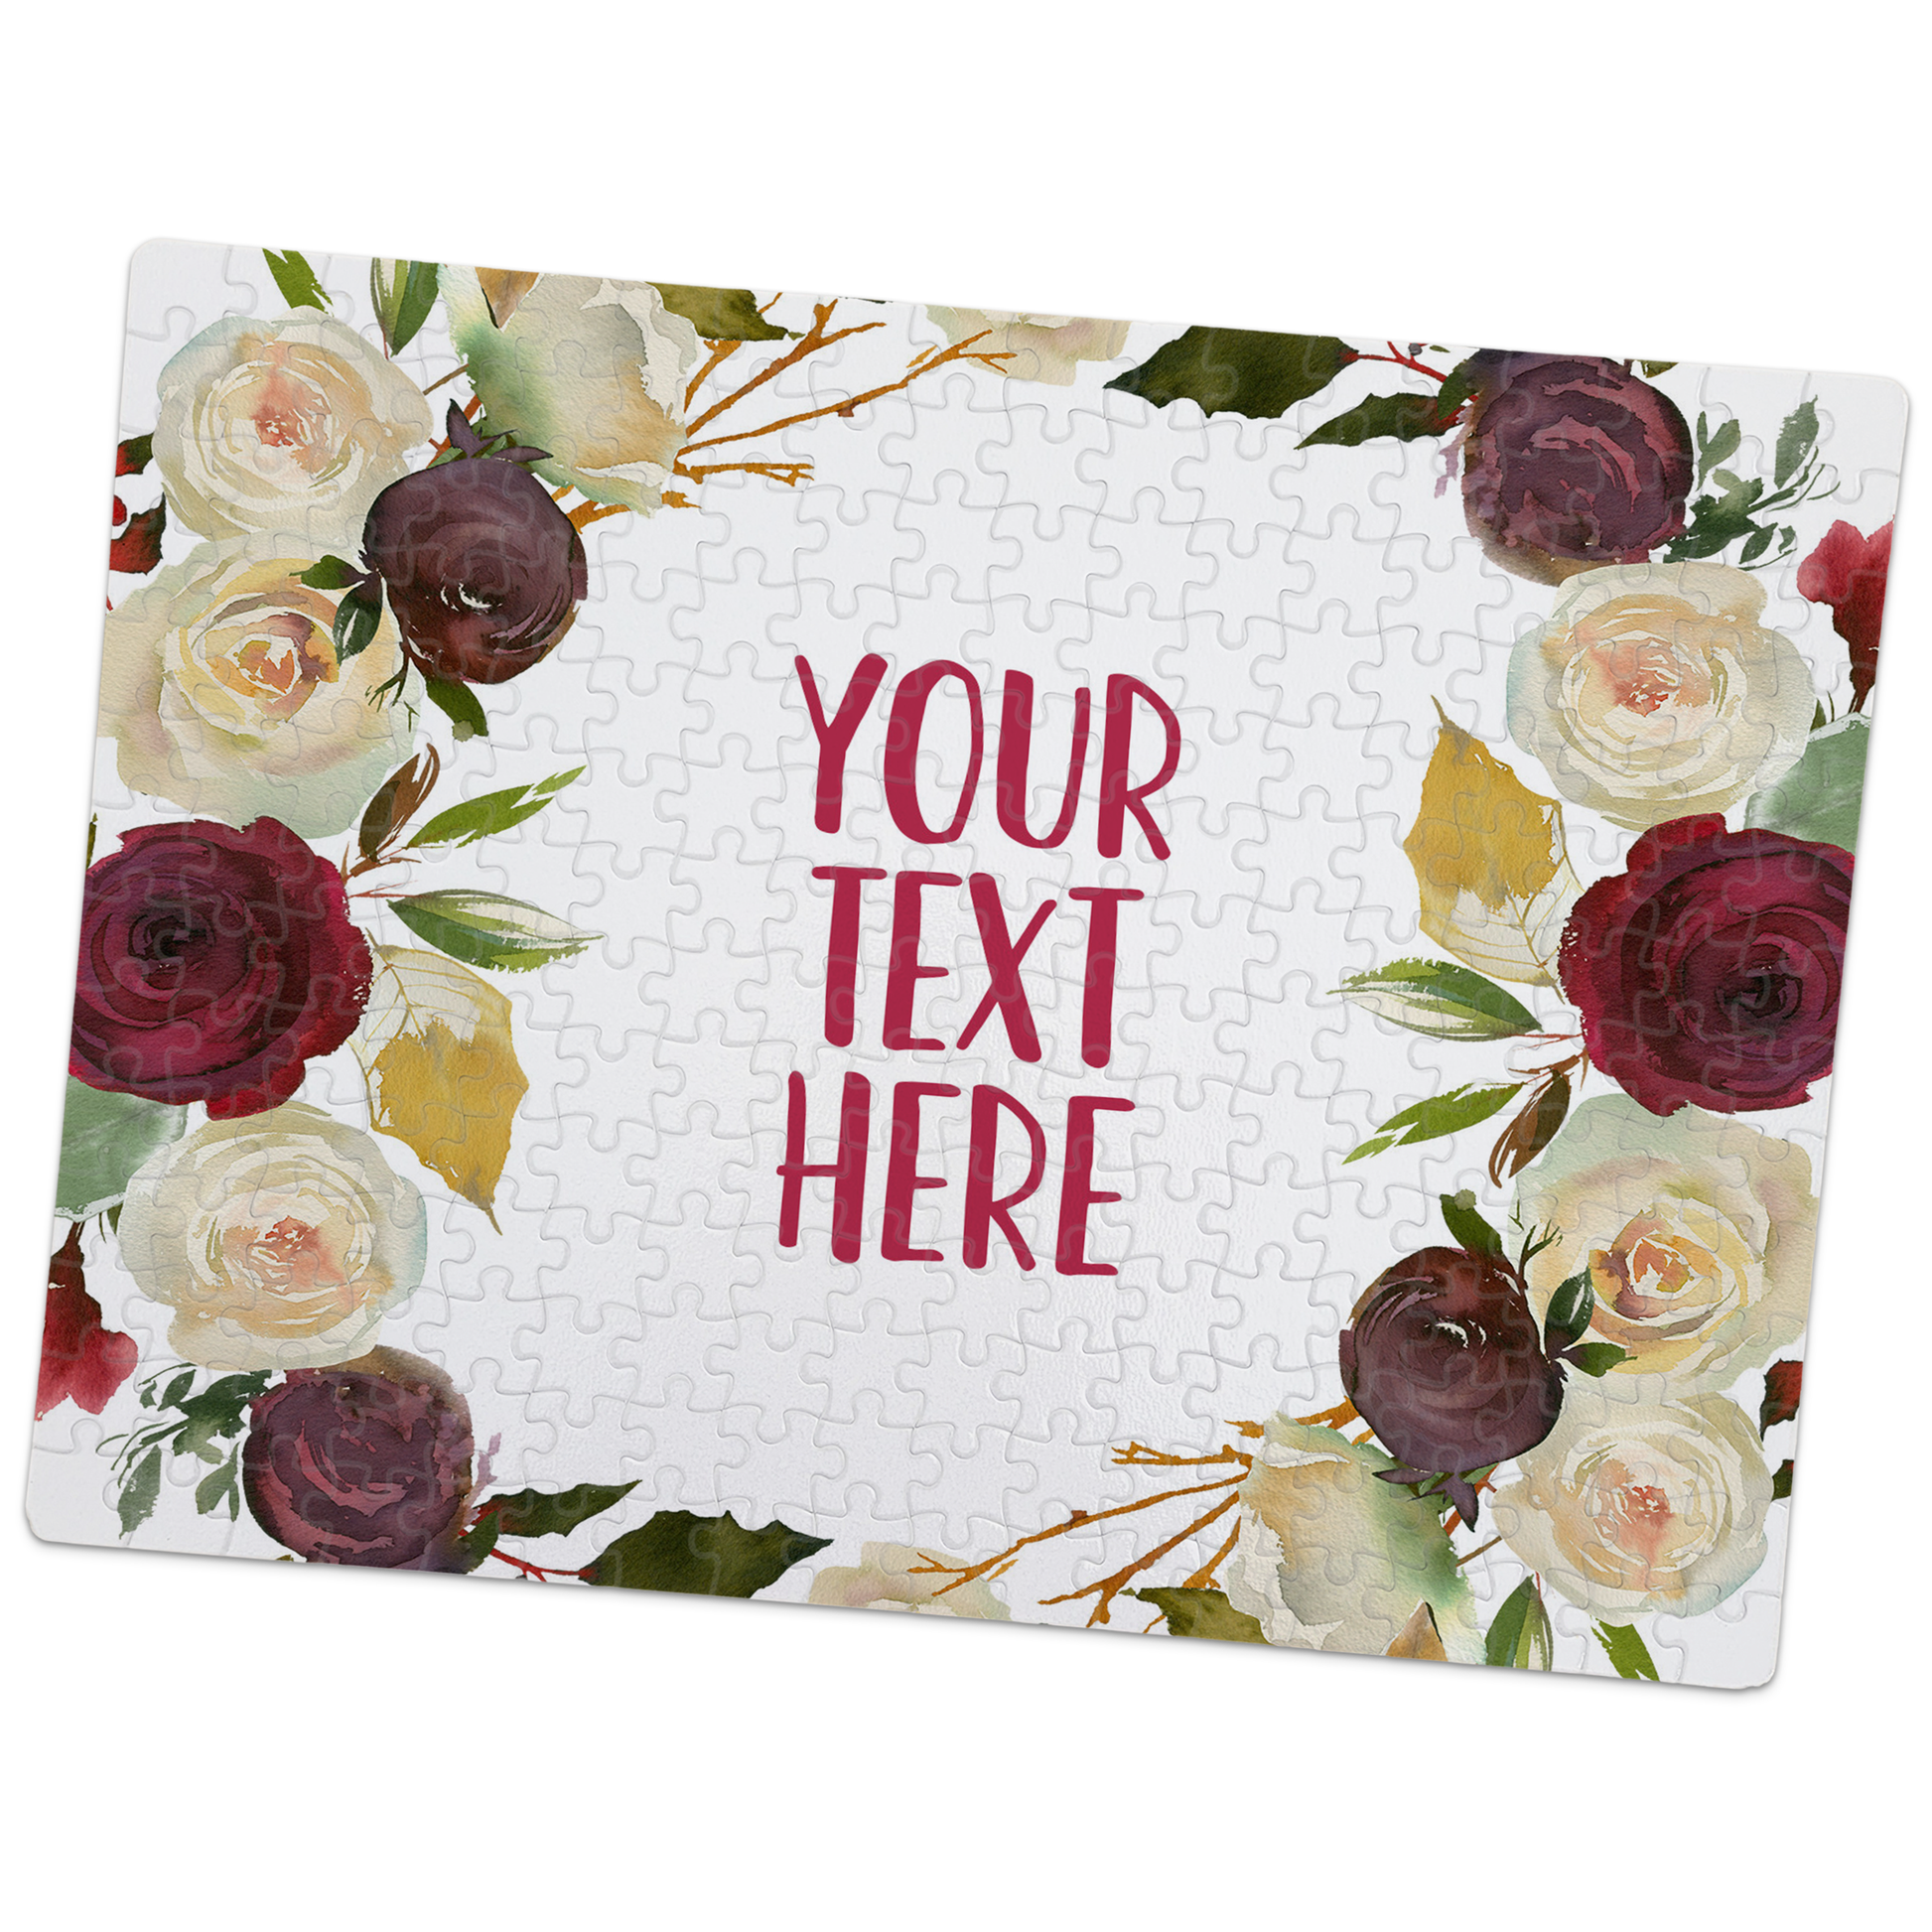 Create Your Own Puzzle - Floral Design - CYOP0148 | S'Berry Boutique